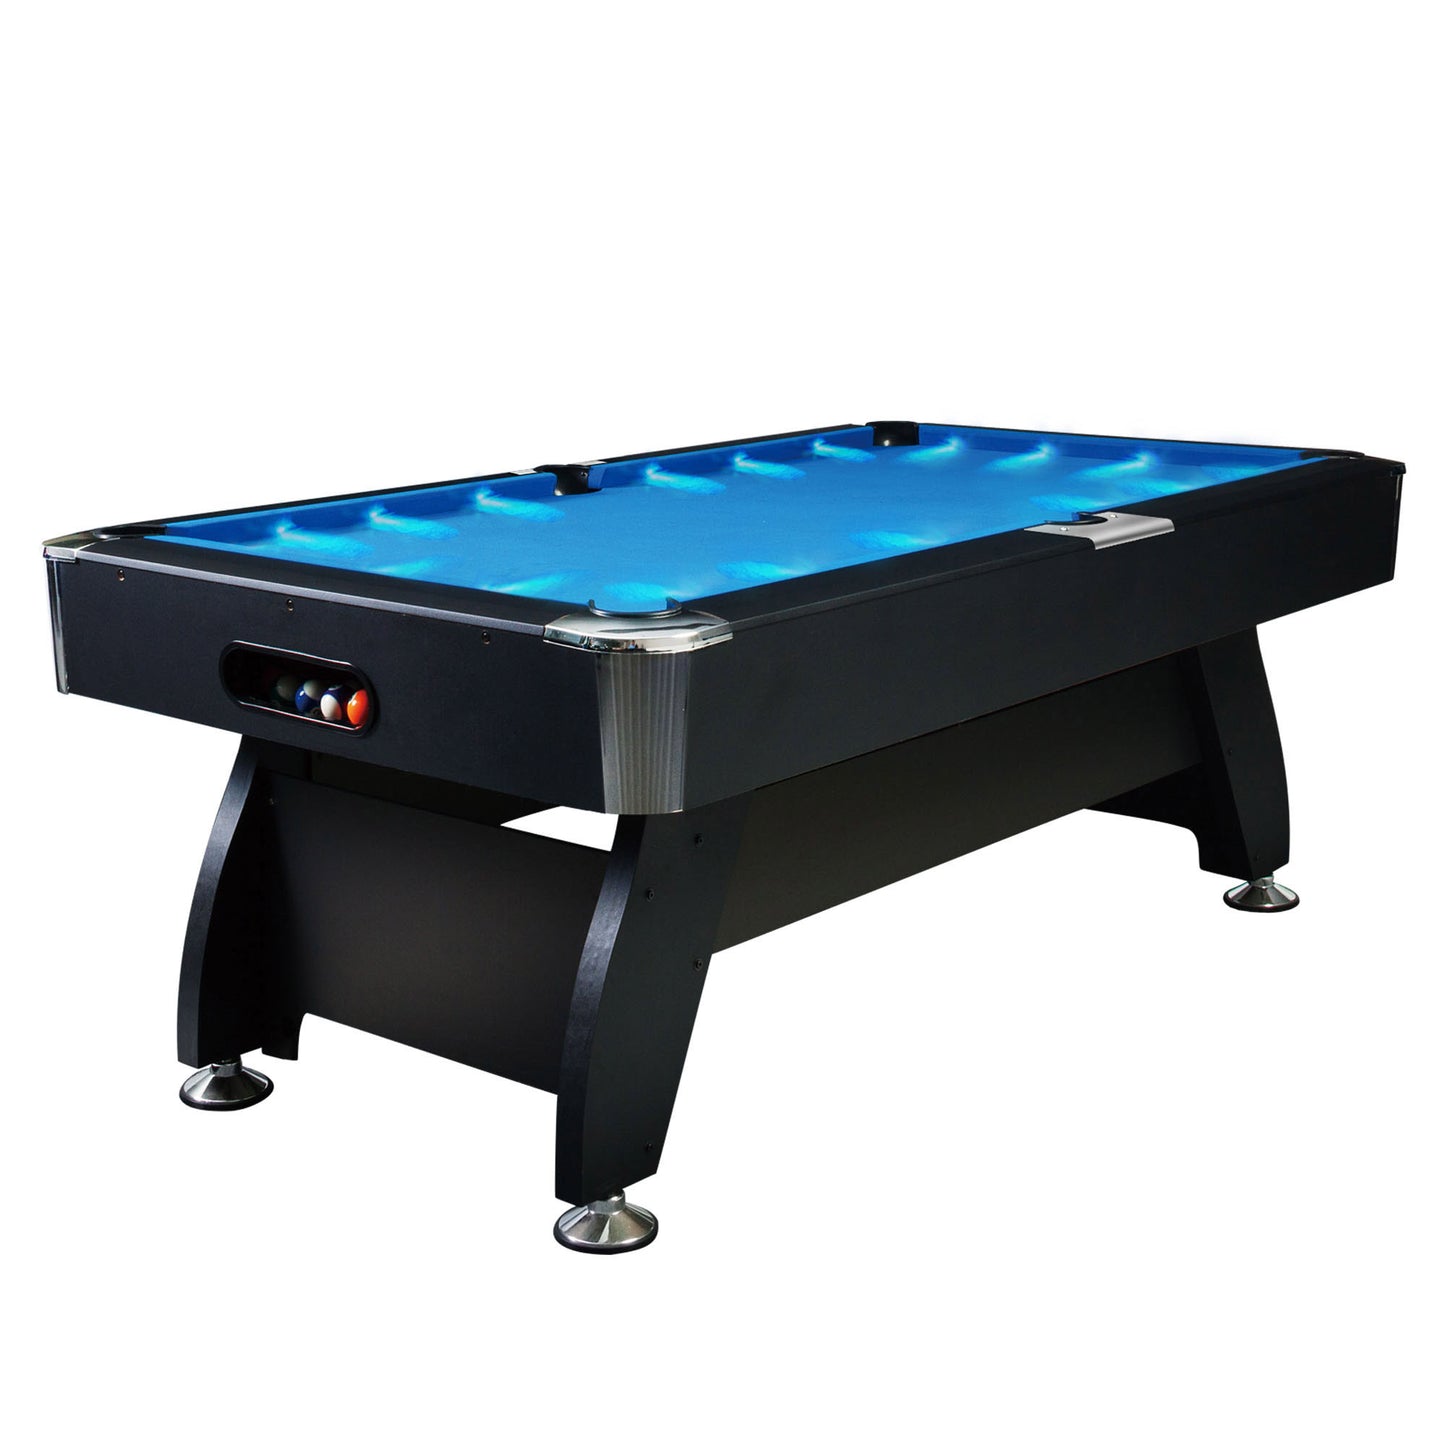 8FT LED Snooker Billiard Pool Table with Free Accessories - Blue